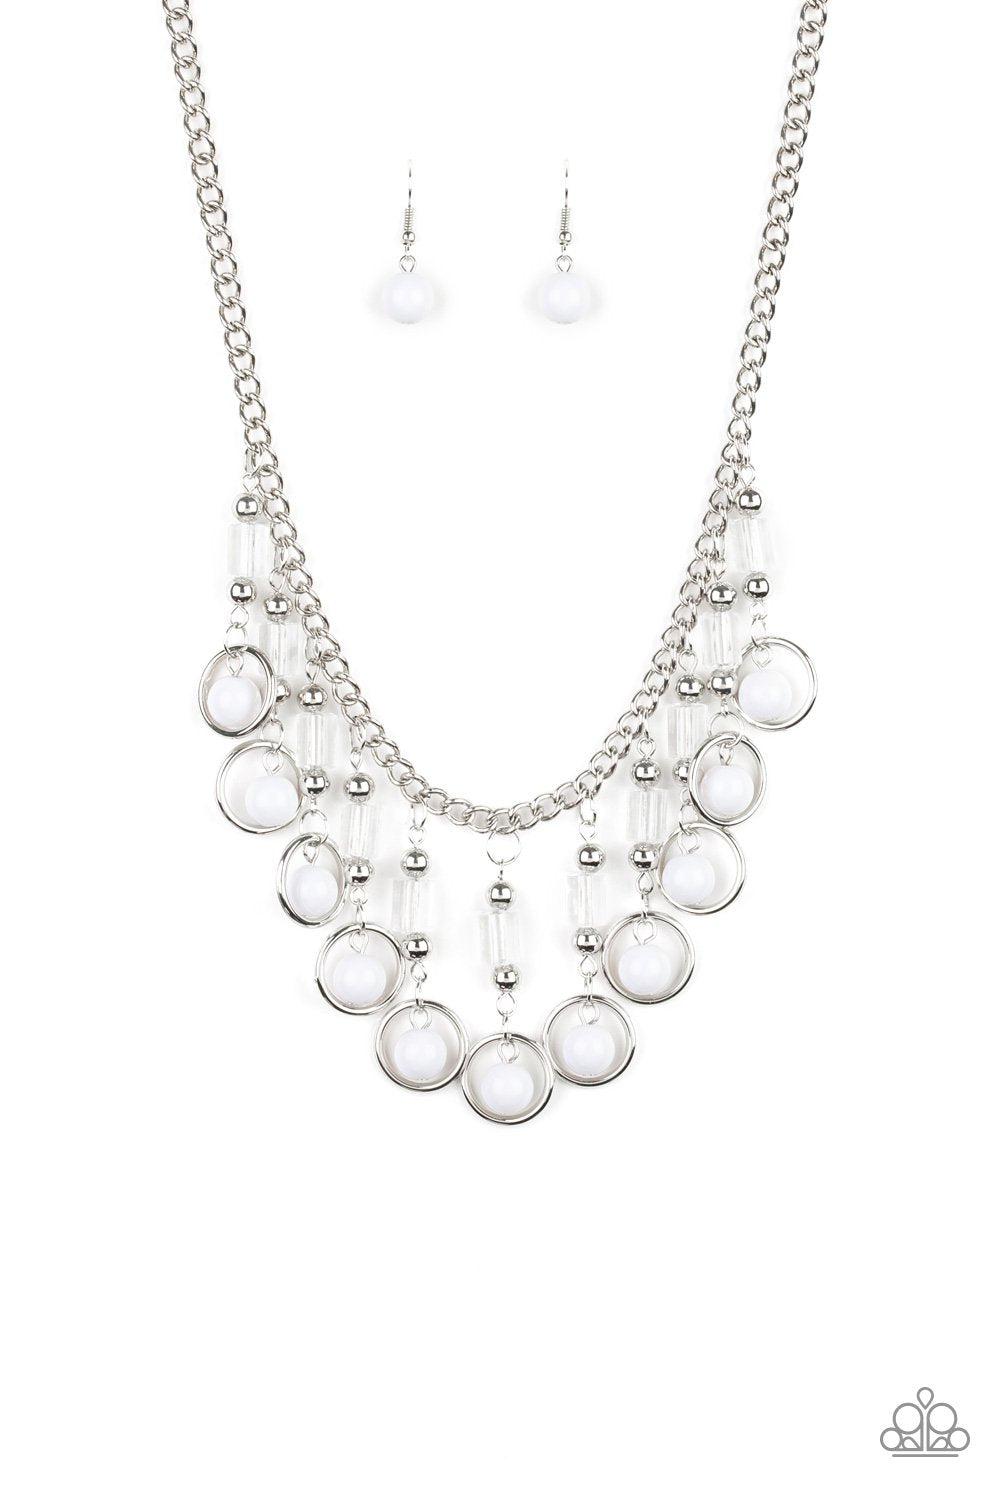 Paparazzi - Soon To Be Mrs. - White Pearl Necklace | Fashion Fabulous  Jewelry